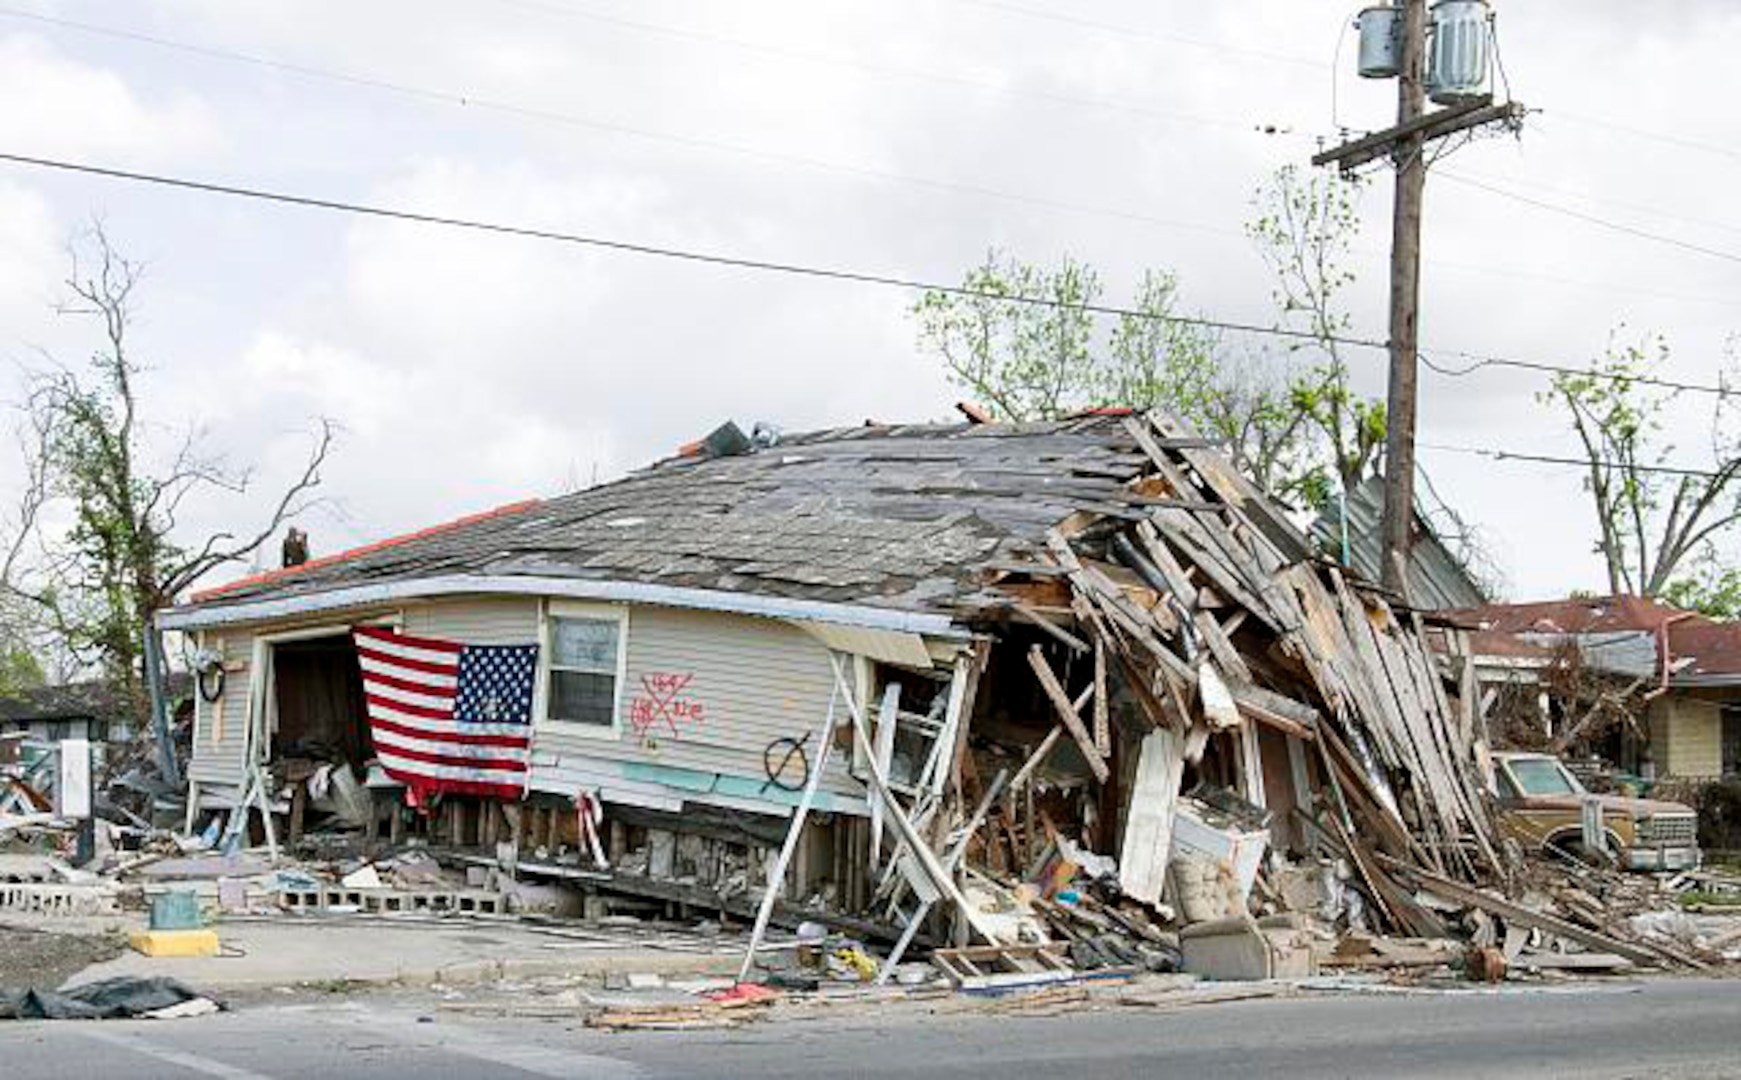 Hurricane Katrina left destruction in its wake in 2005, necessitating a massive response from the Army and Air National Guard.